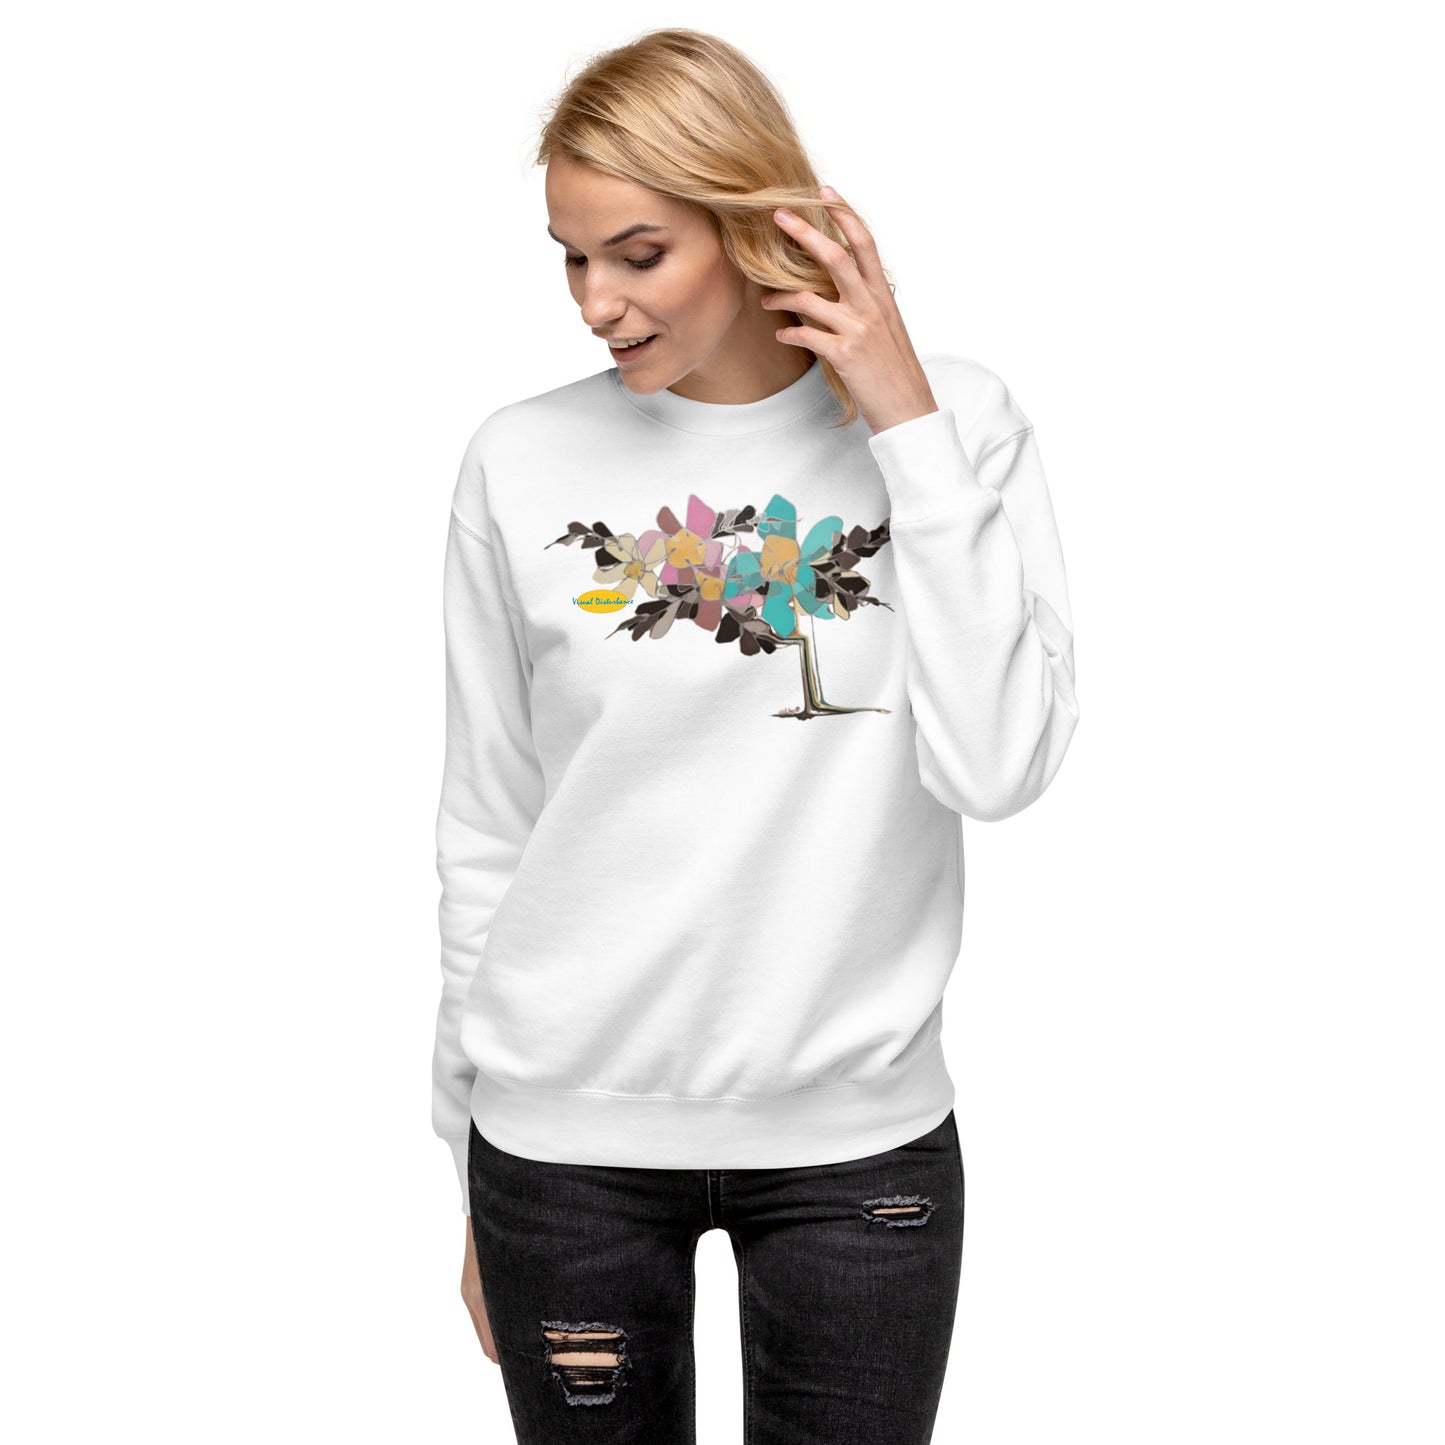 Abstract Flowers in Teal and Pink Unisex Premium Sweatshirt